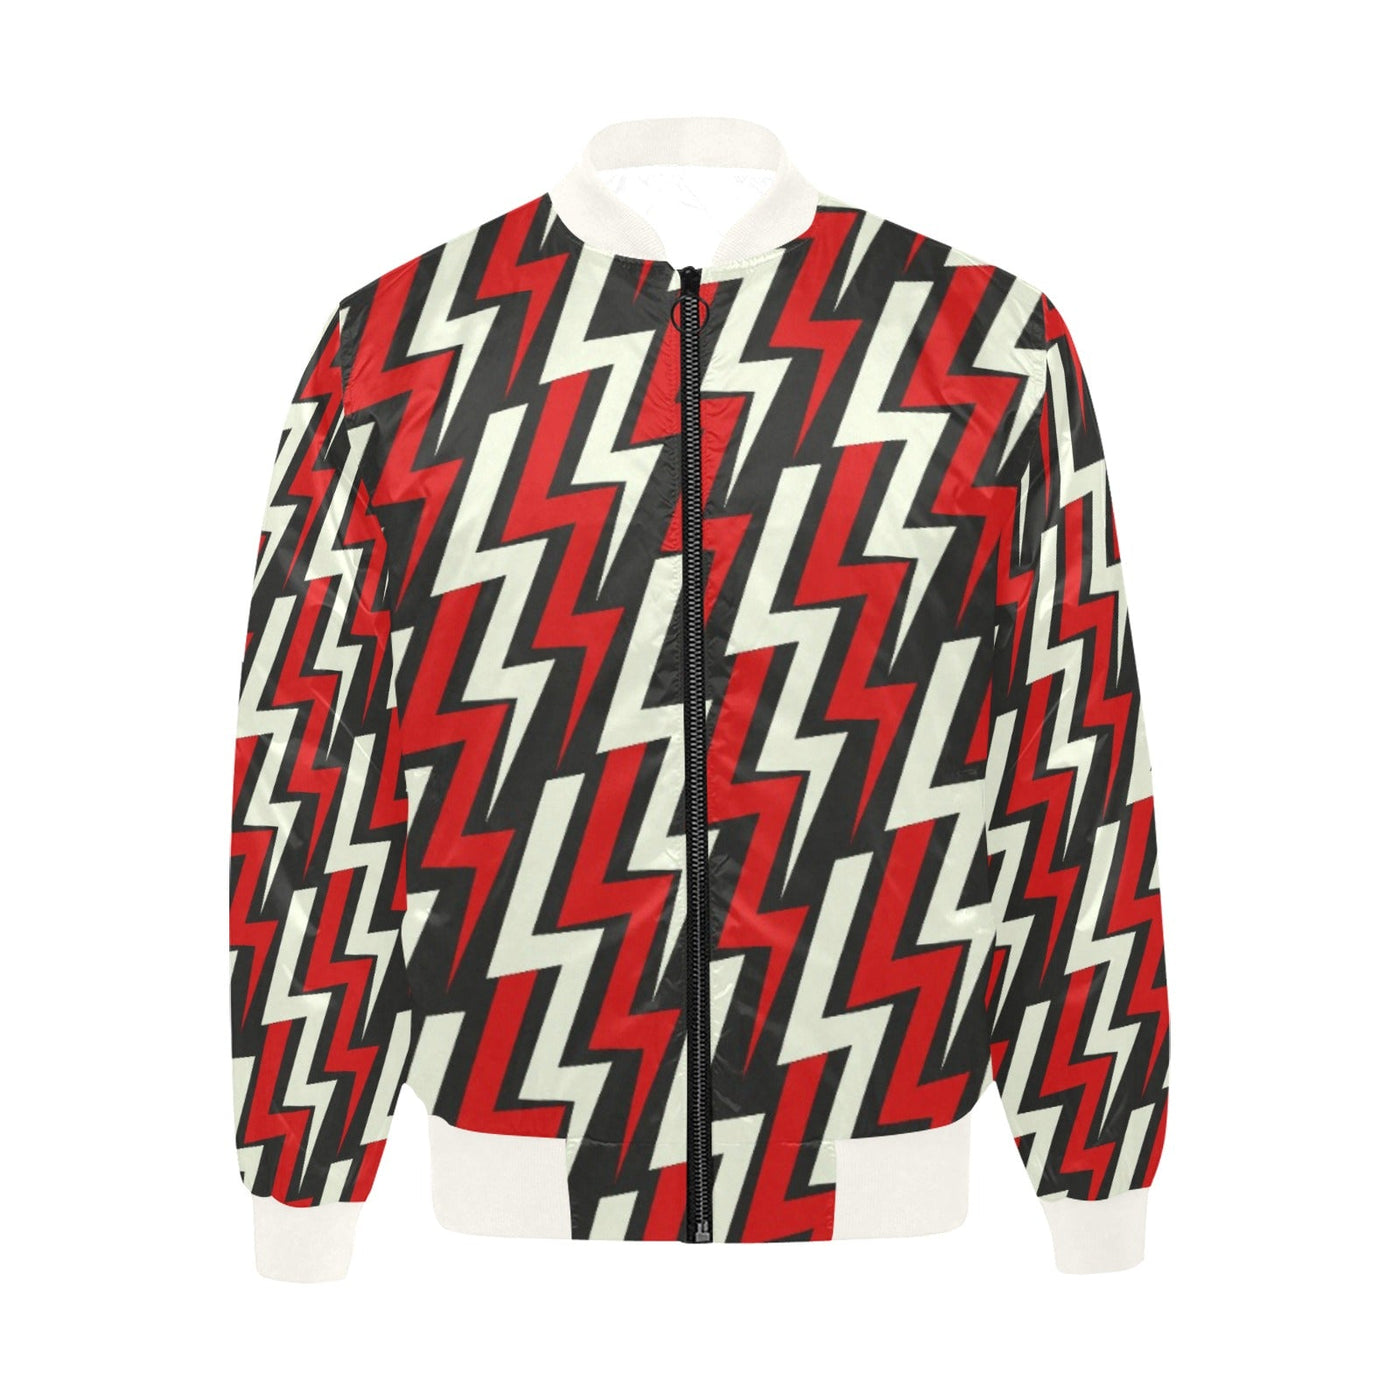 Electric Thunderbolt Pattern Quilted Bomber Jacket (Red & Black)